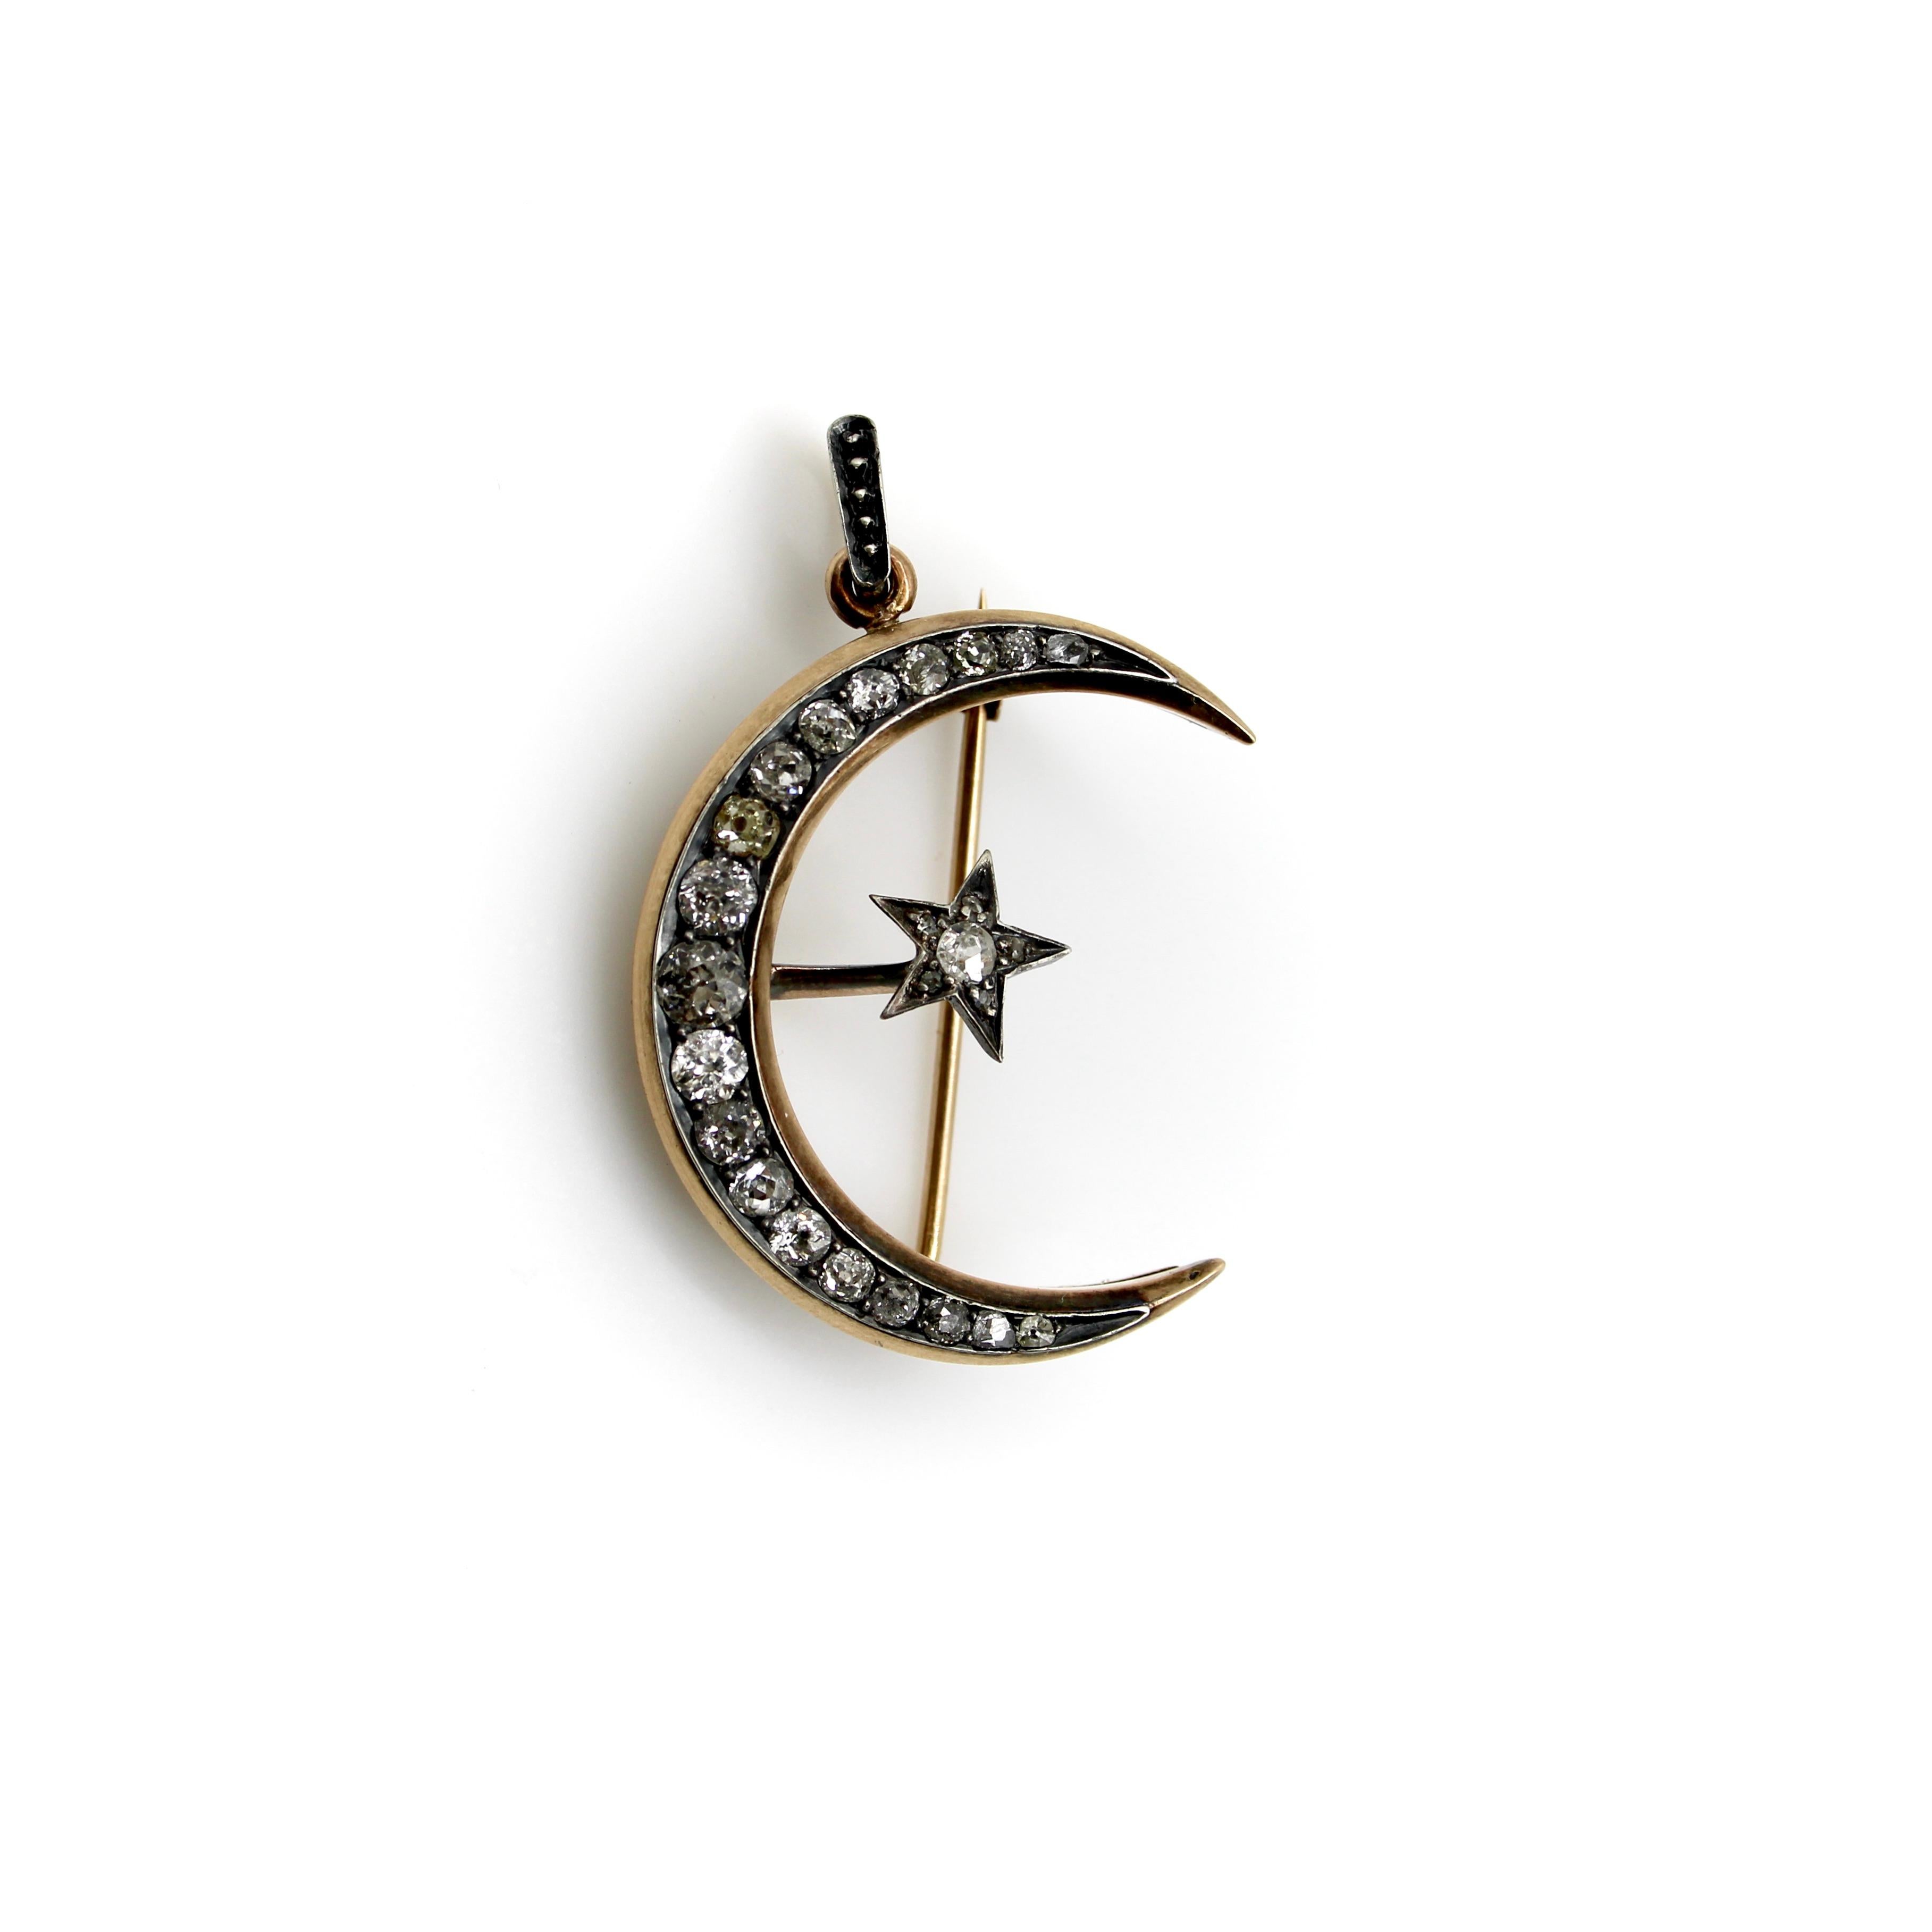 Circa the Victorian era, this 14k gold crescent moon can be converted into either a brooch or pendant. The moon and star are encrusted with Old Mine Cut and Rose Cut diamonds, with a silver front, rose gold back, and wonderful patina that emphasizes